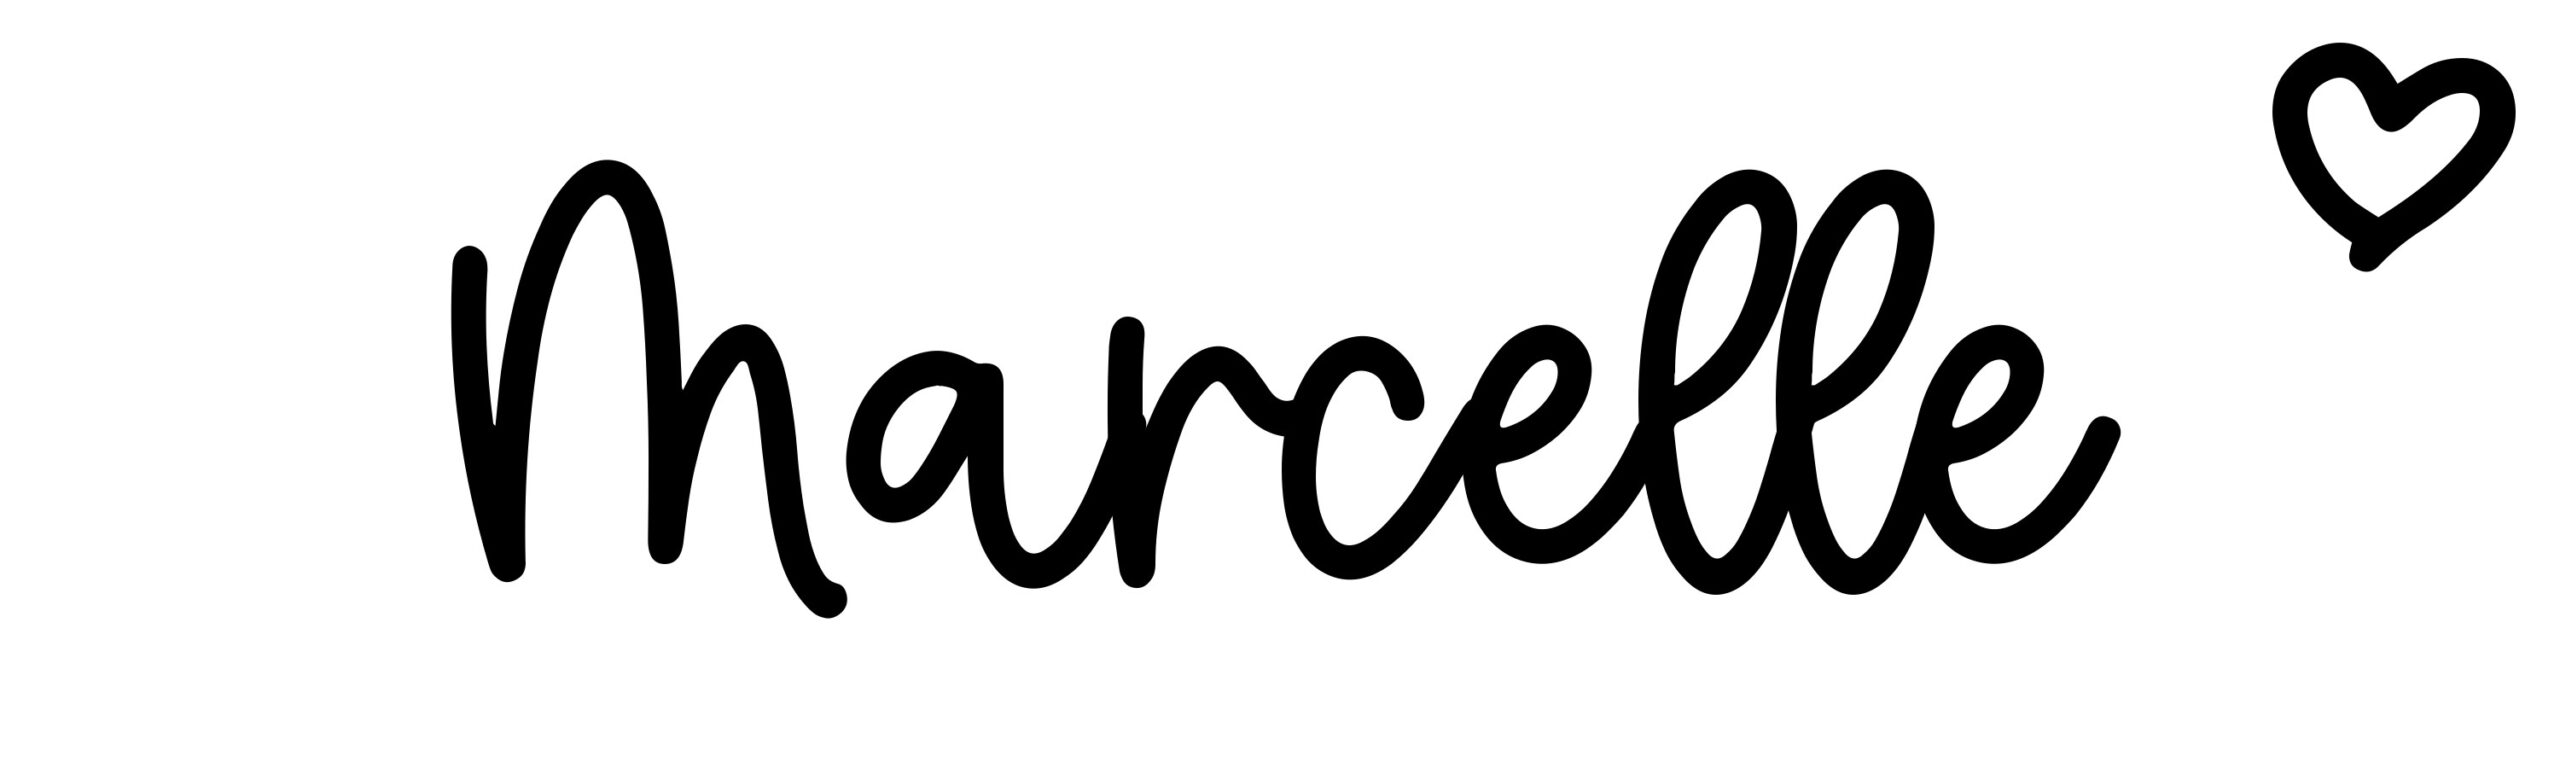 Marcelle - Name meaning, origin, variations and more